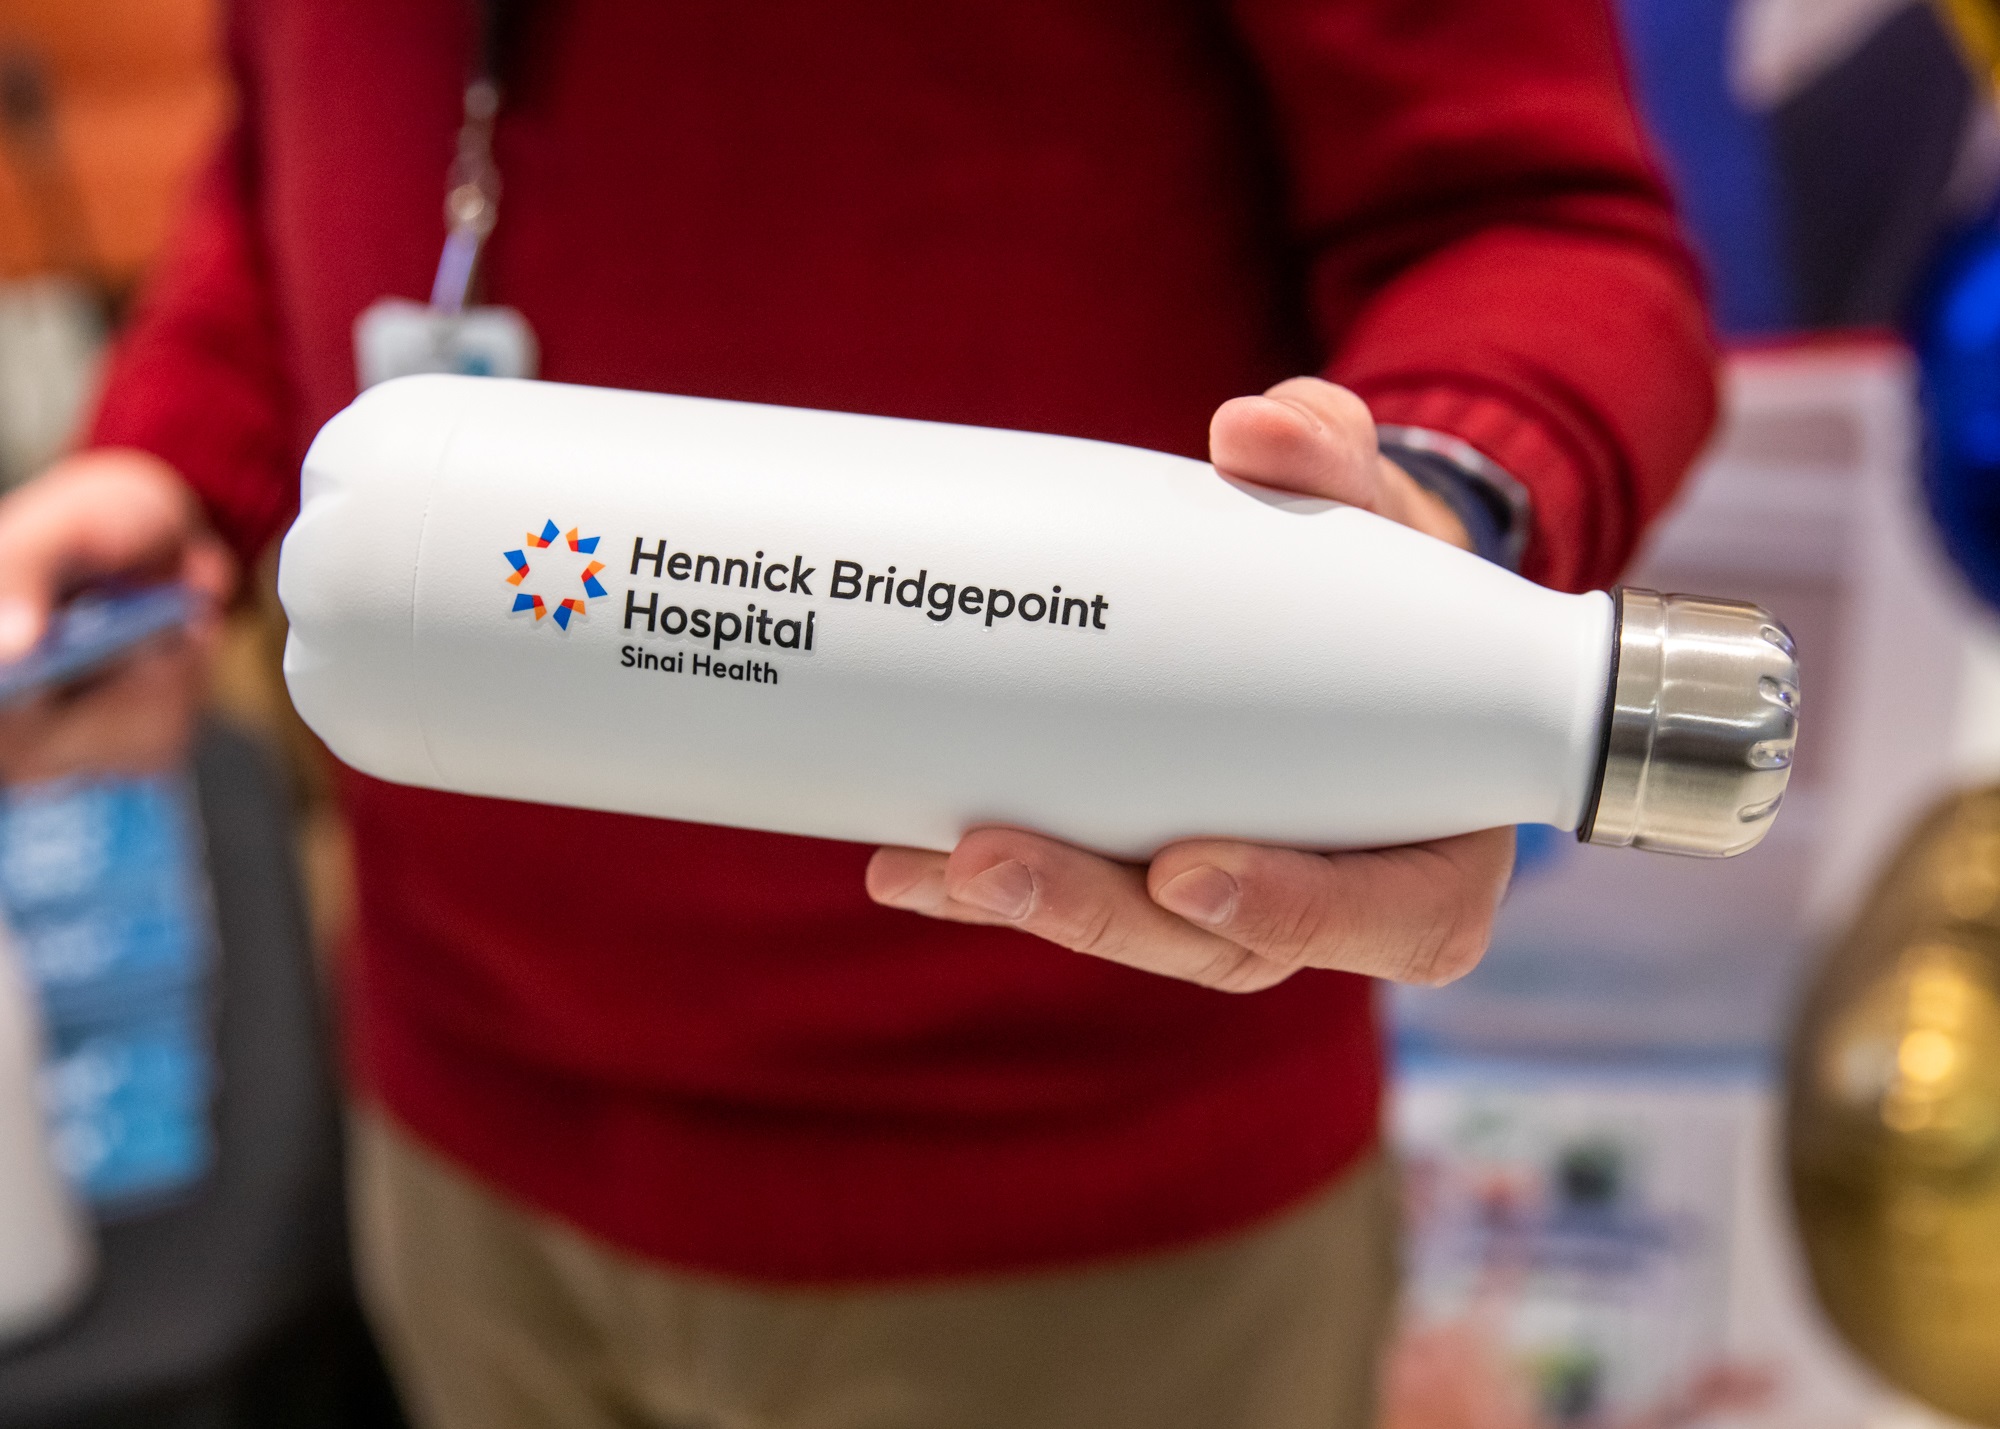 A close-up photo of a metal water bottle with a logo that says Hennick Bridgepoint Hospital and the words Sinai Health in smaller letters below.